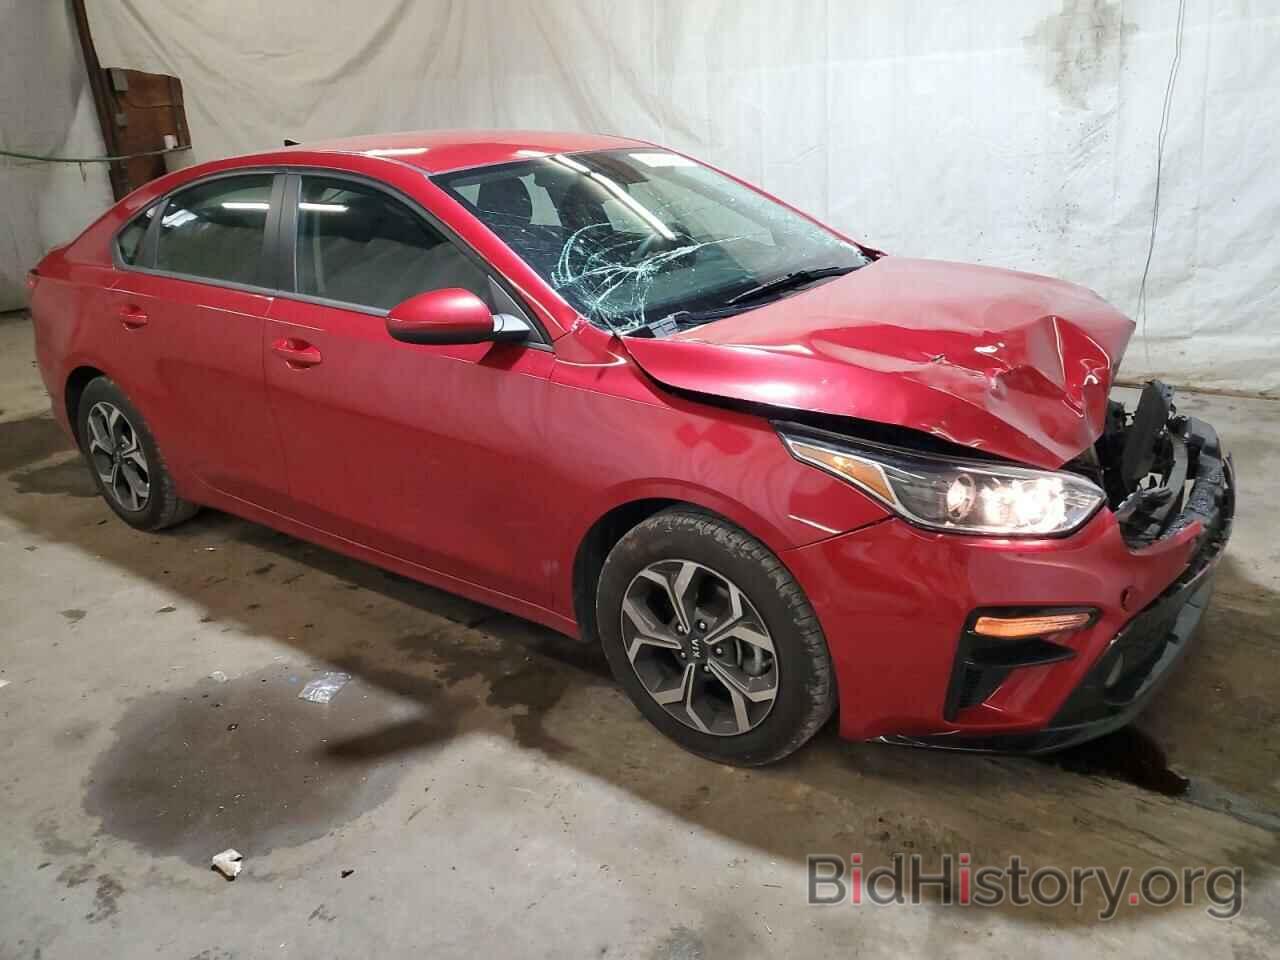 Report 3KPF24AD0LE155110 KIA FORTE 2020 RED GAS - price and damage history